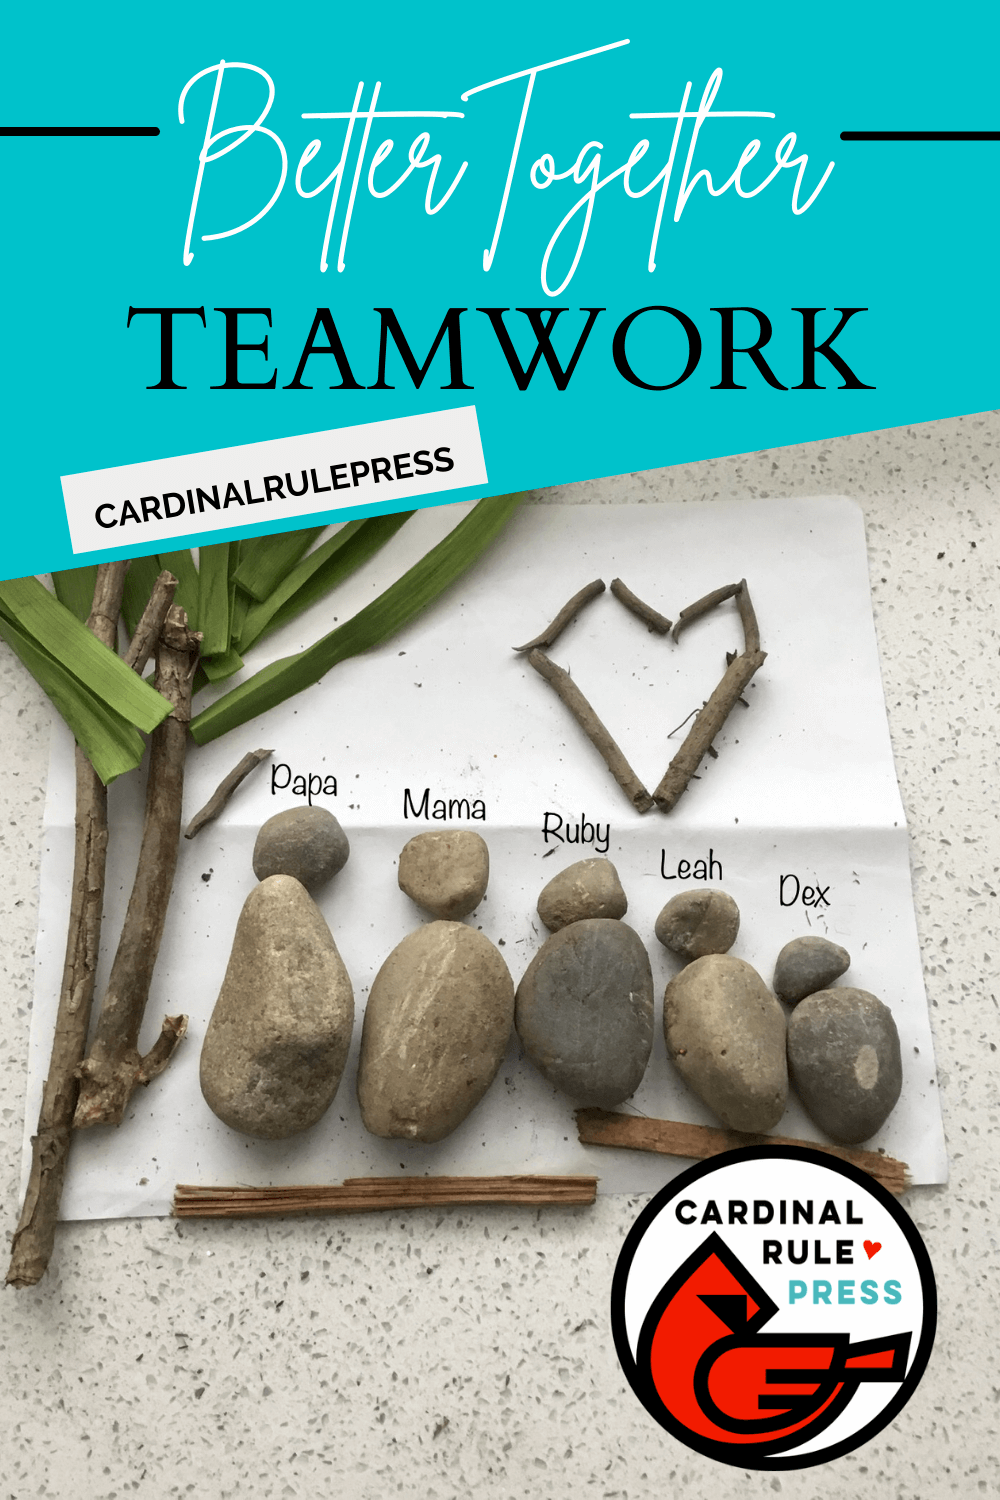 Teamwork is something our children need to see modeled on a day to day basis to realize the importance. #BetterTogether #Teamwork #BooksToRead #PictureBooks #ChildrensBooks